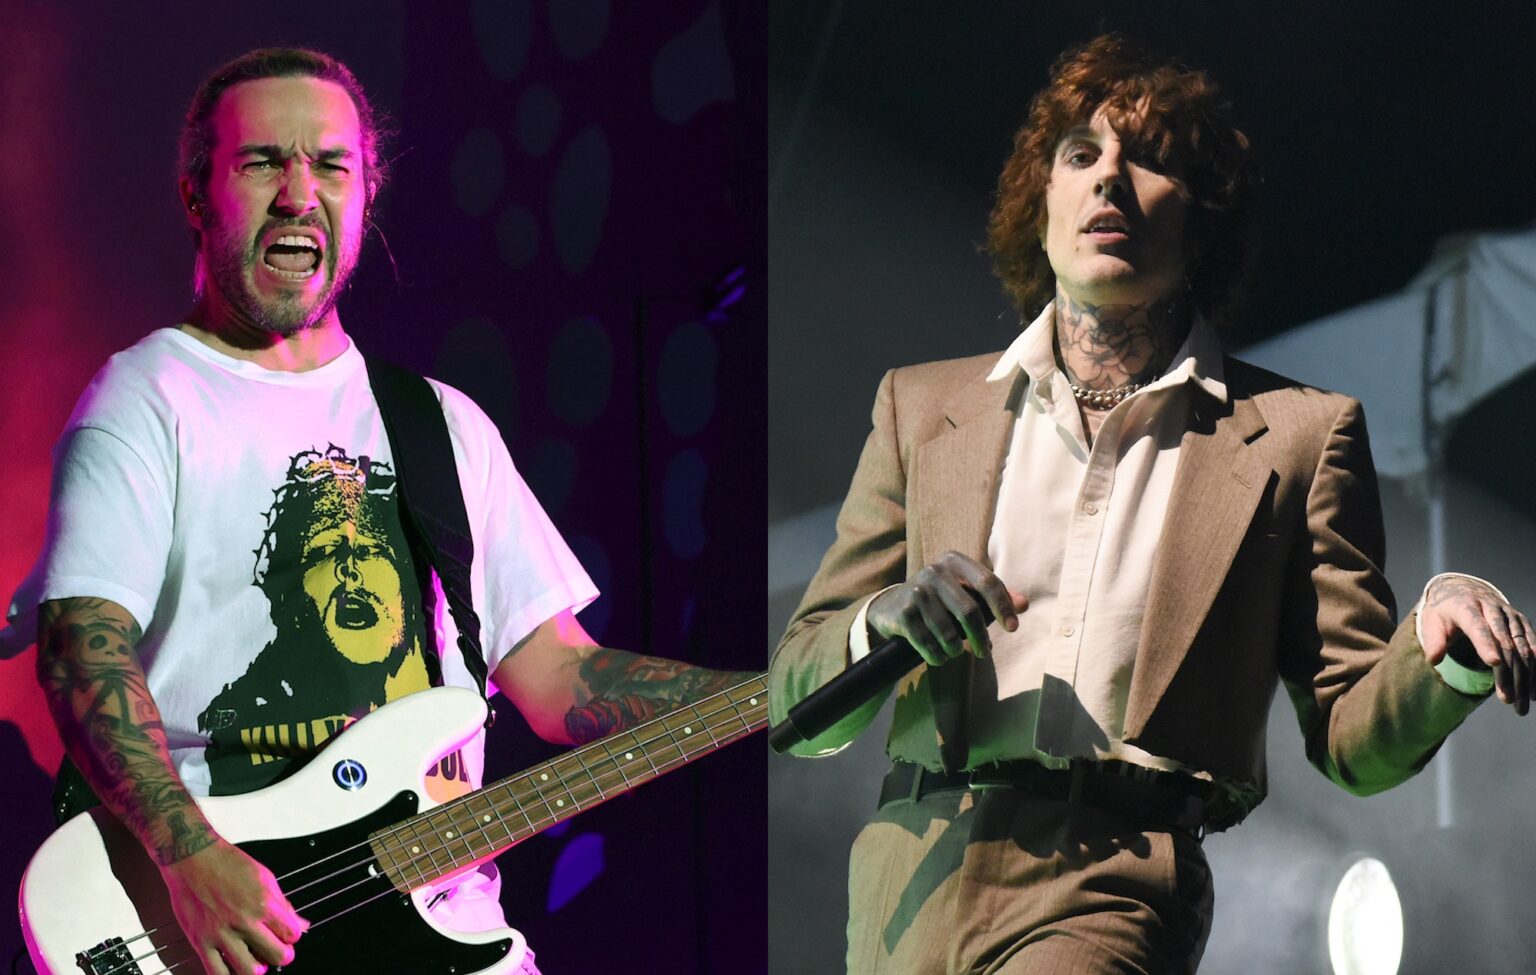 It looks like Fall Out Boy and Bring Me The Horizon are touring